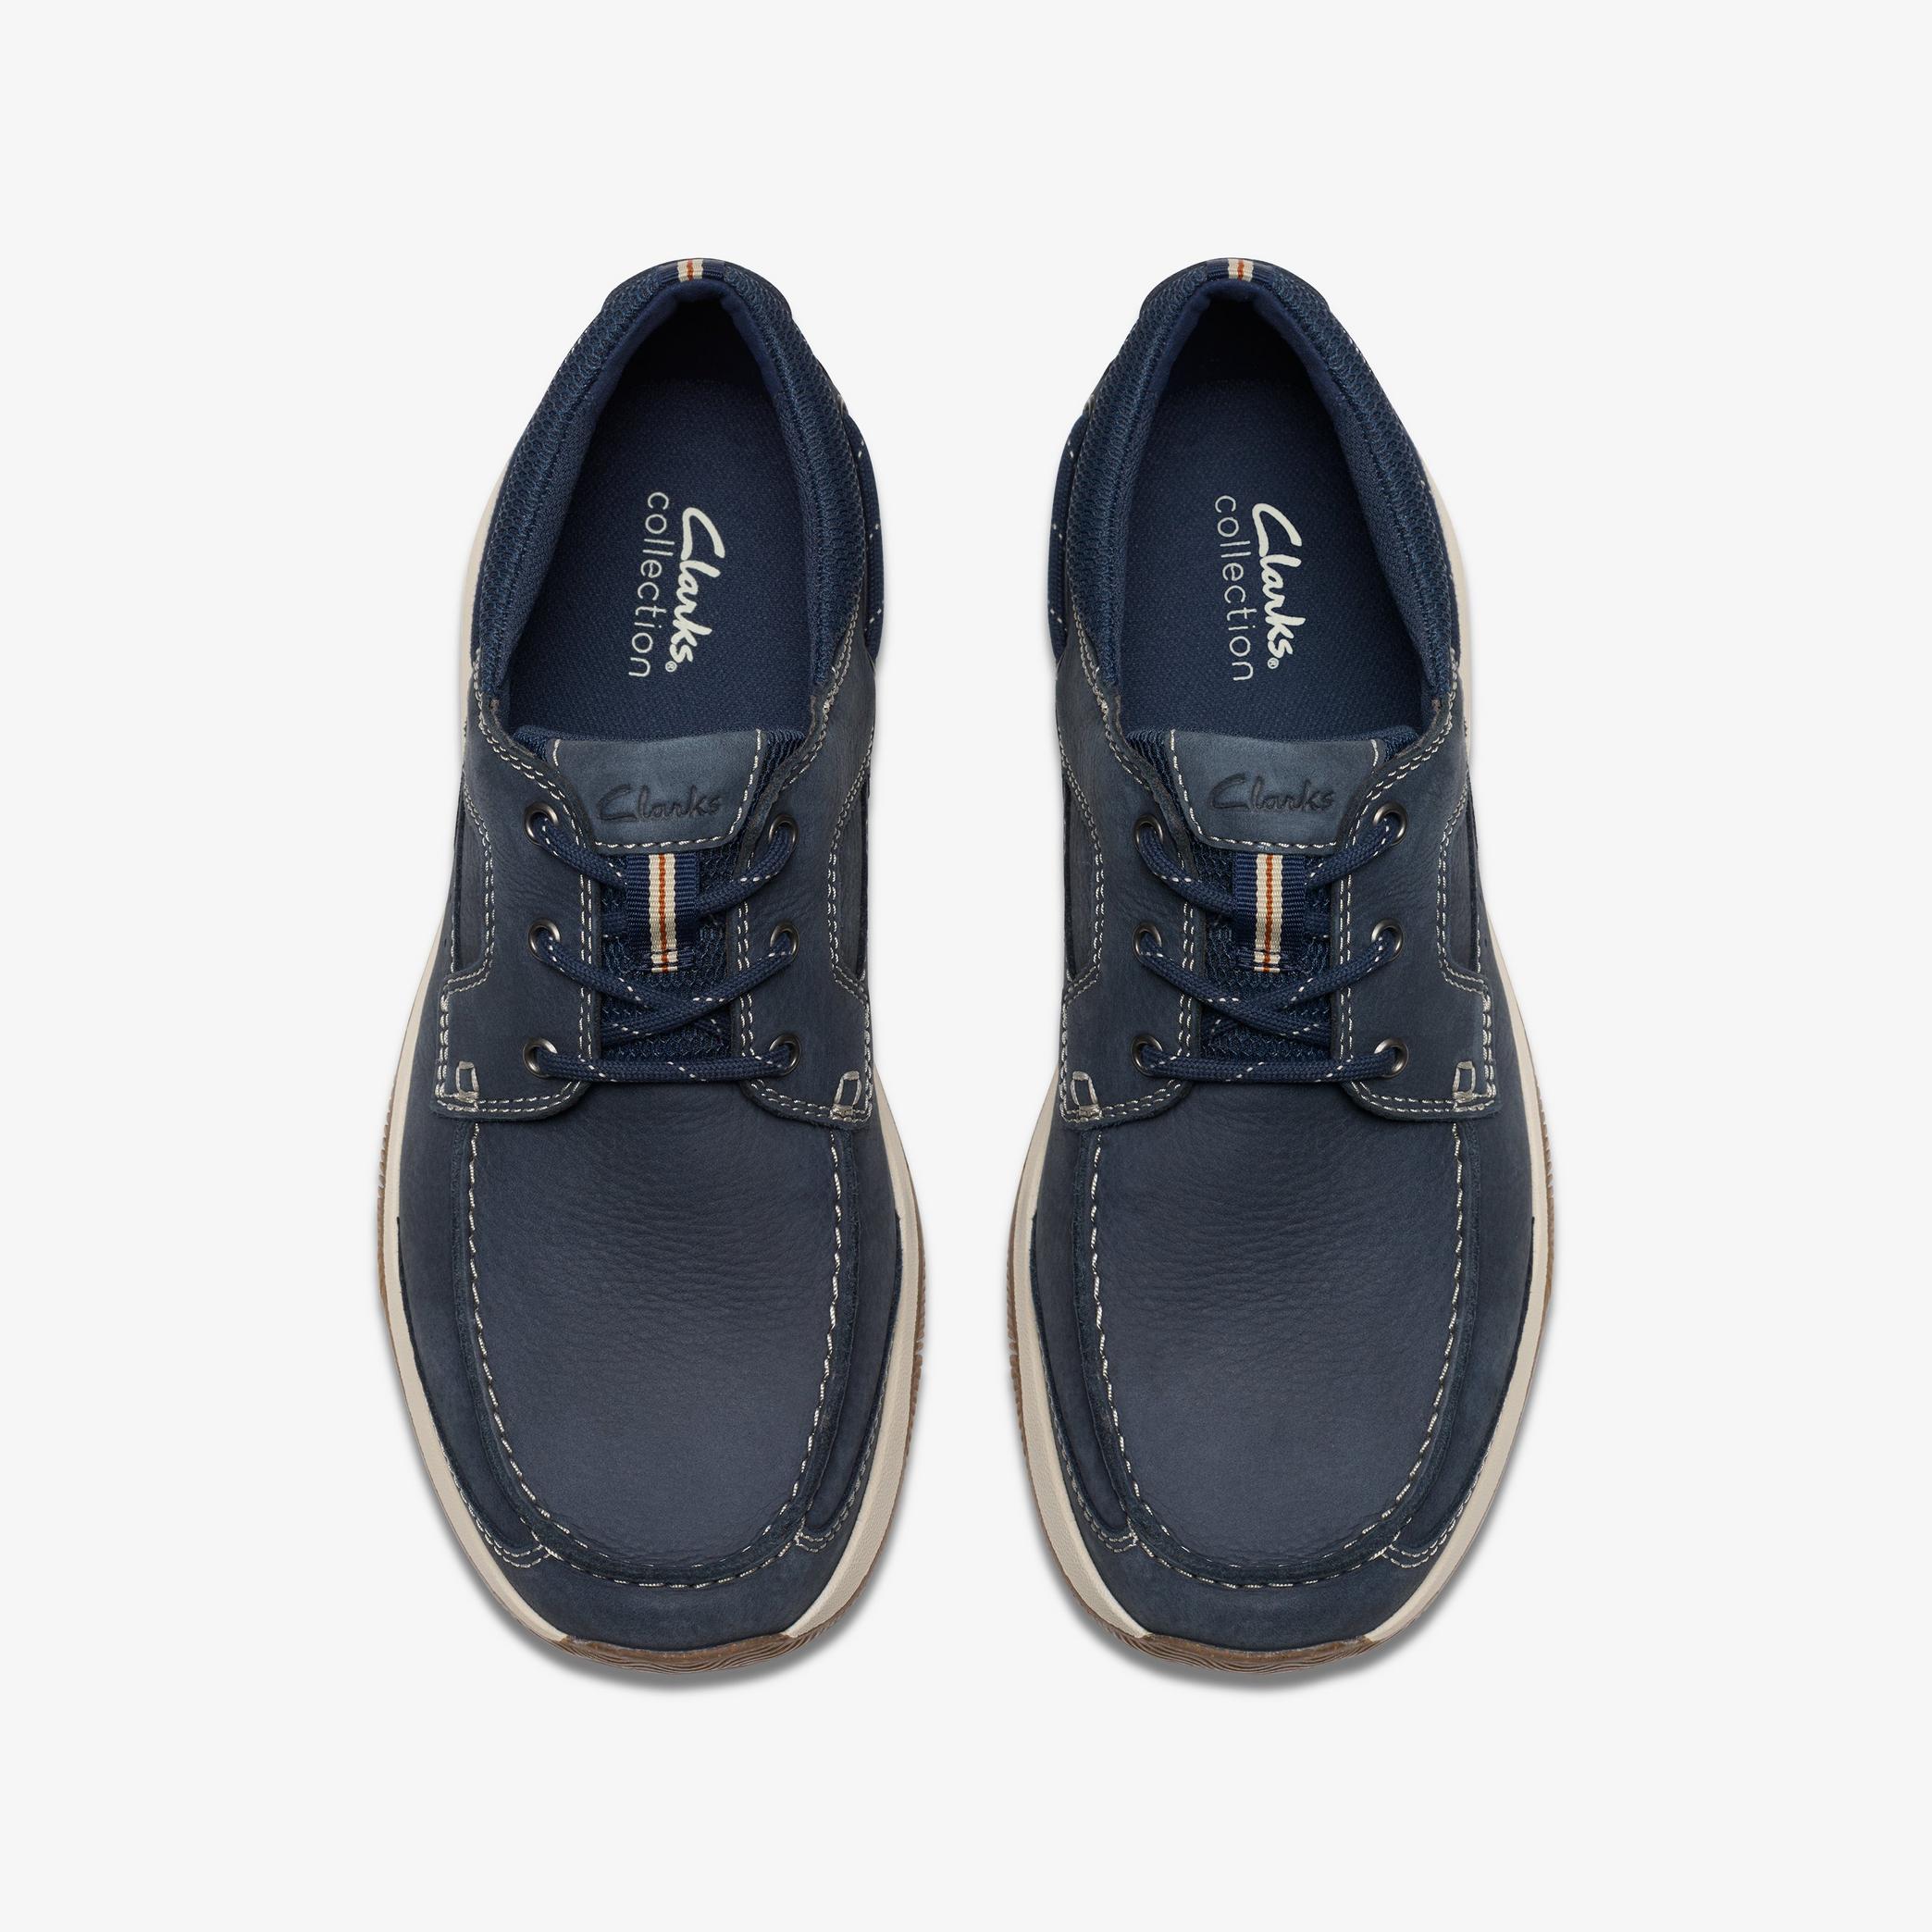 Sailview Lace Navy Nubuck Boat Shoes, view 7 of 8